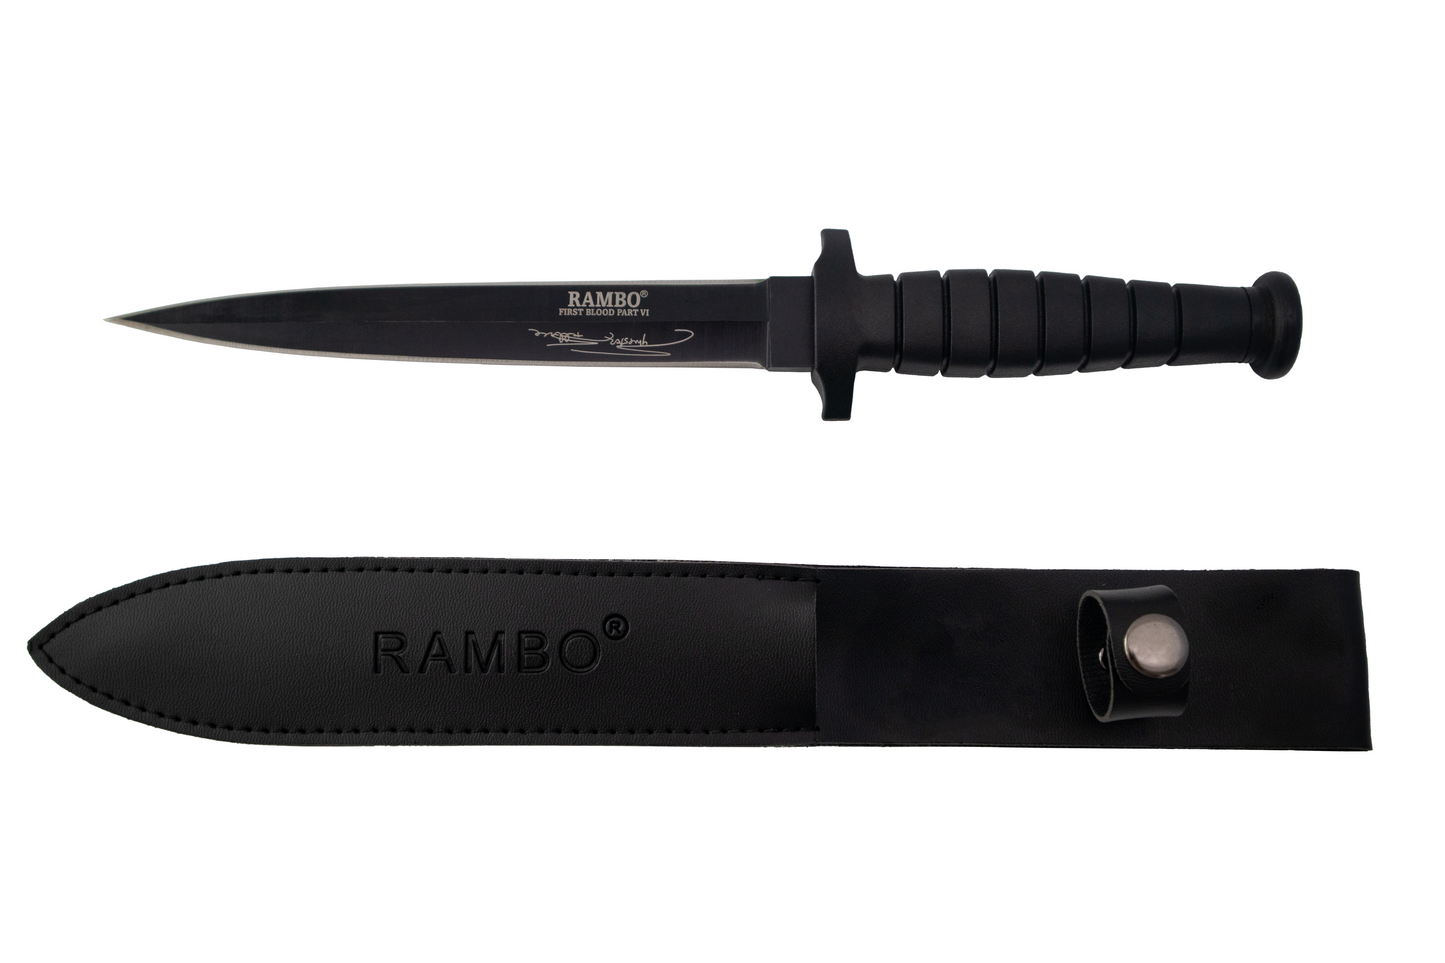 RAMBO FIRST BLOOD PART VI SURVIVAL HUNTING BOOT KNIFE WITH LEATHER SHEATH